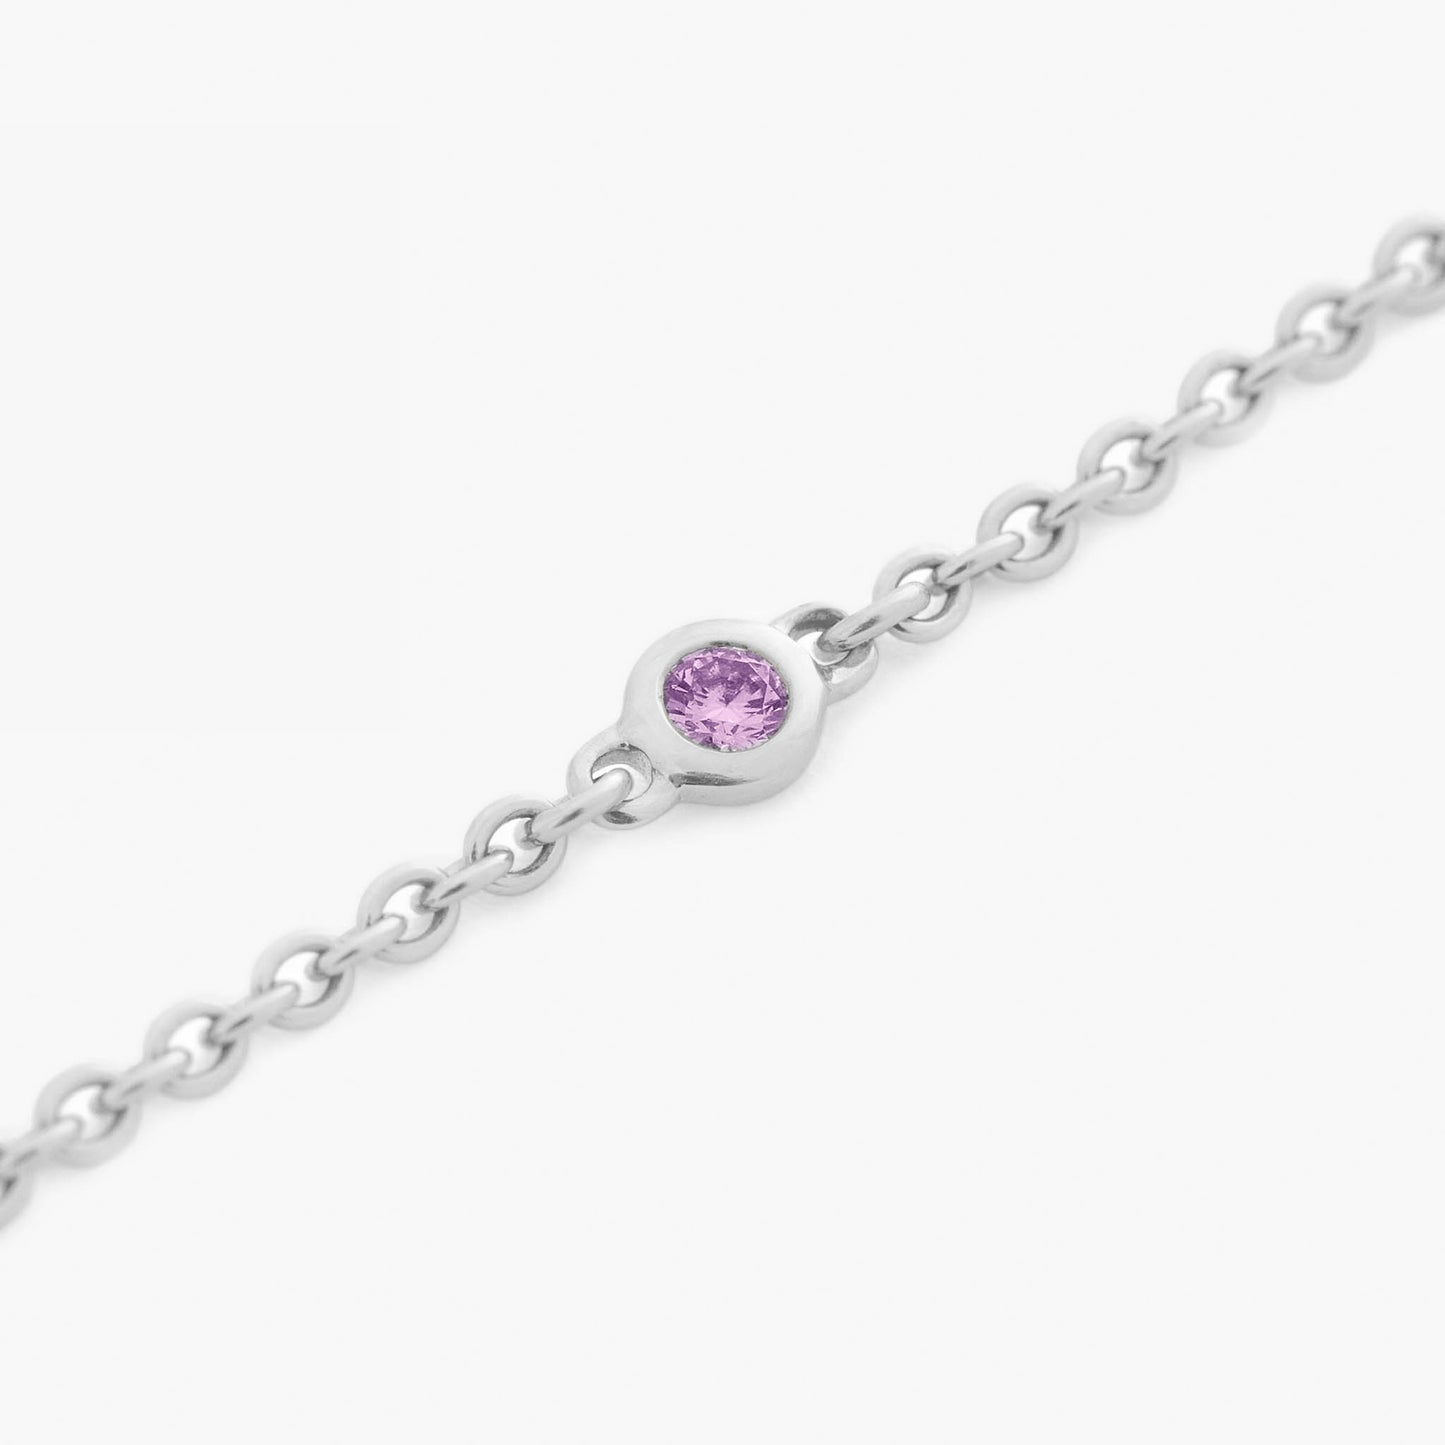 Guiding Star 18ct White Gold & Pink Sapphire Necklace, 40cm